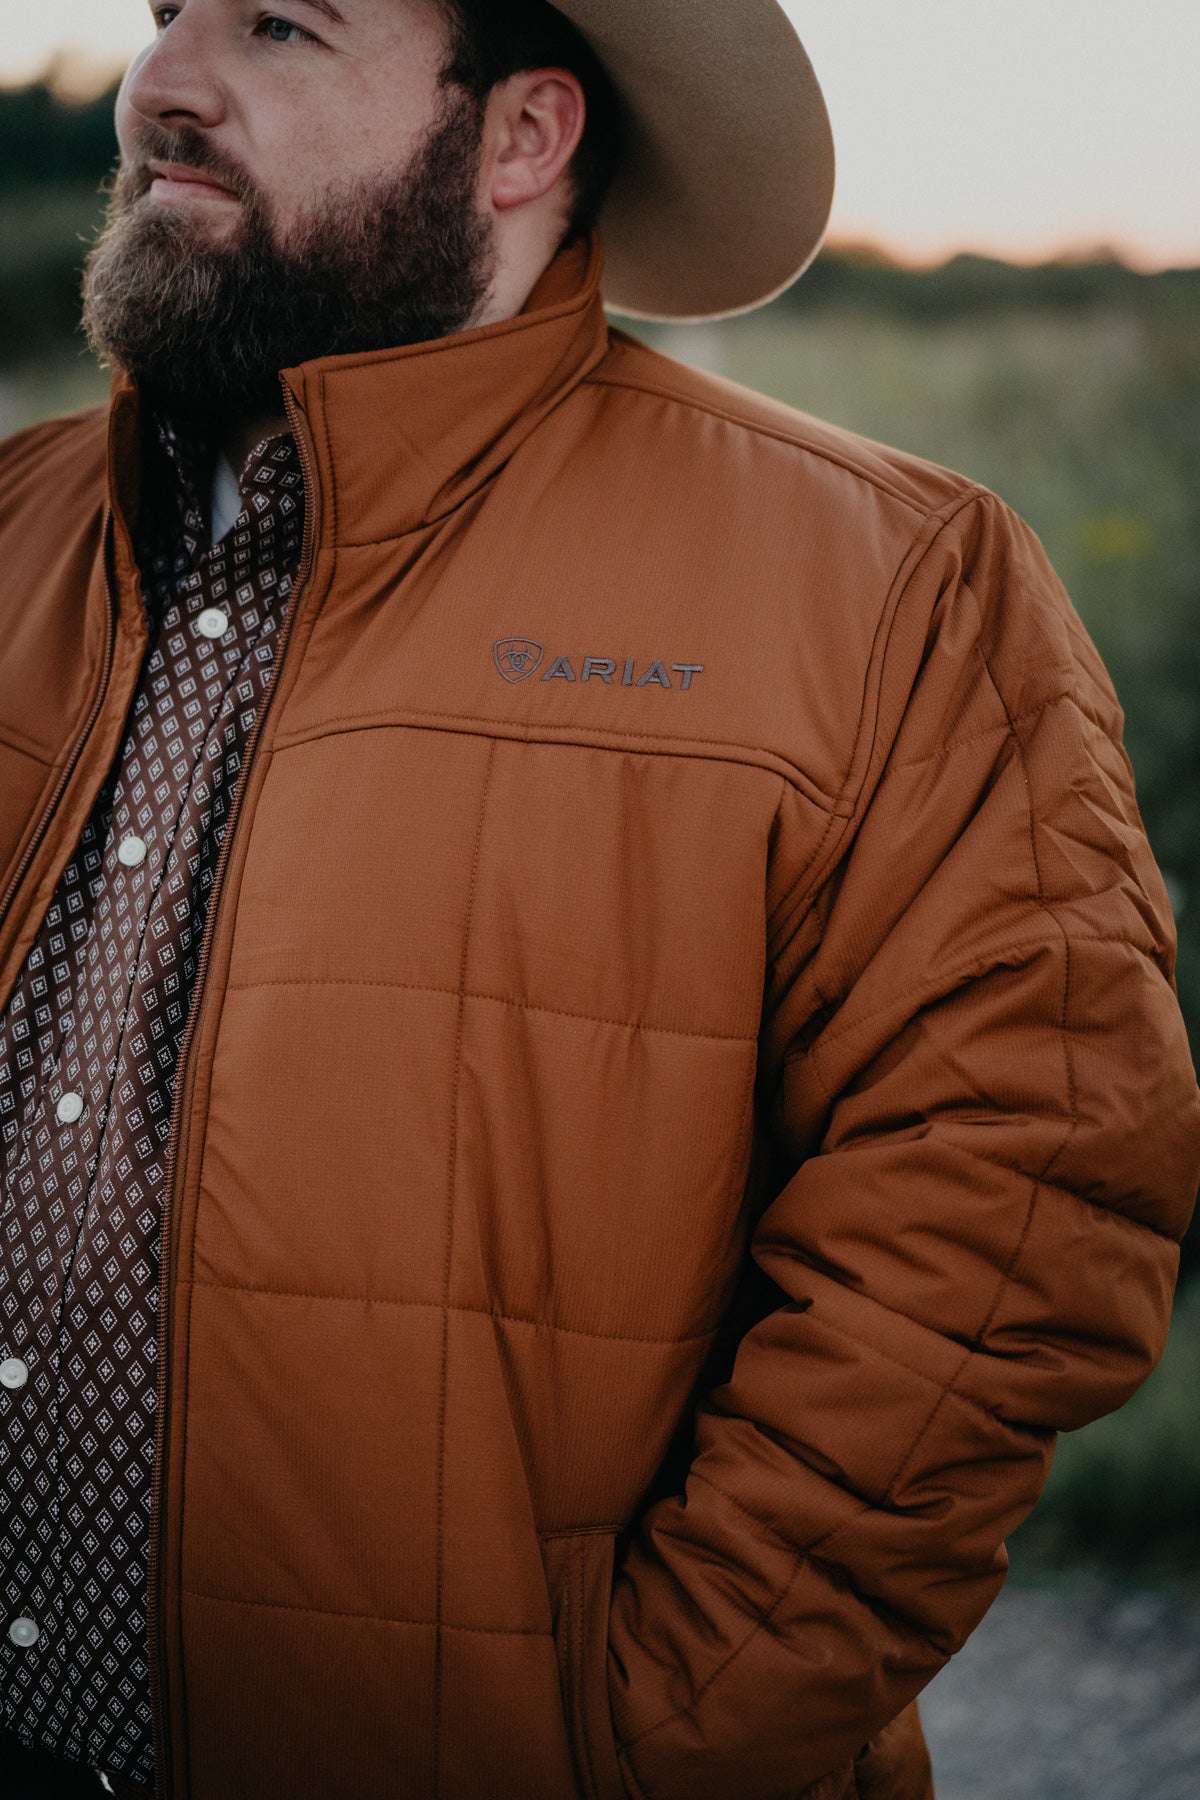 'Crius' Men's Insulated Jacket by Ariat {Chestnut}